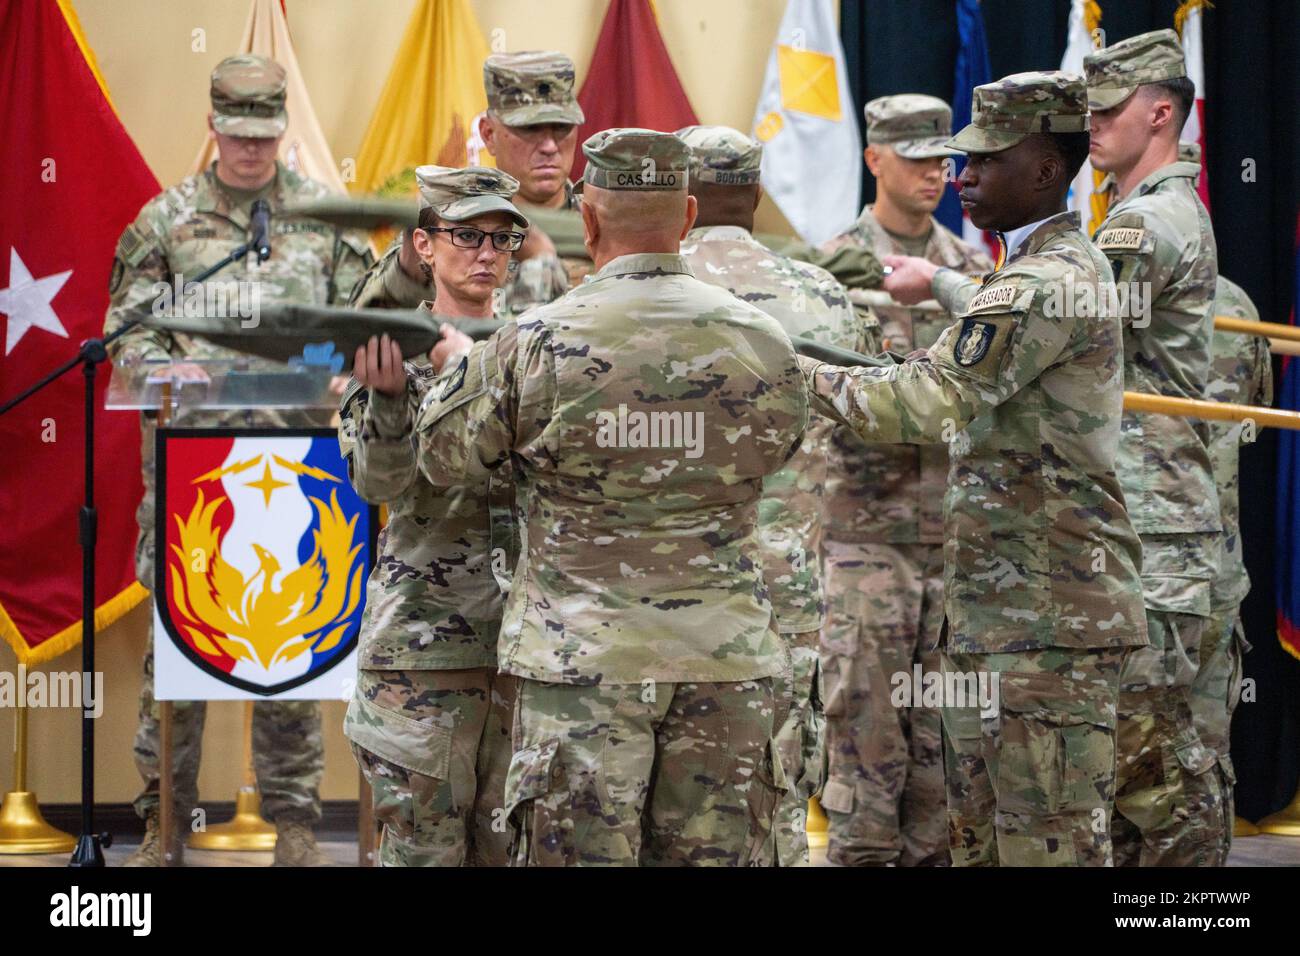 U.S. Army Col. Carrie Perez, commander of the 36th Sustainment Brigade and Command Sgt. Maj. Ernesto Castillo, senior enlisted advisor to Perez, case their brigade’s flag during a transfer of authority ceremony, Nov. 3, 2022, at Camp Arifjan, Kuwait. The transfer of authority ceremony signifies the end of the responsibilities of Task Force Phoenix followed by the assumption of responsibility by Task Force Hellfighter. Stock Photo